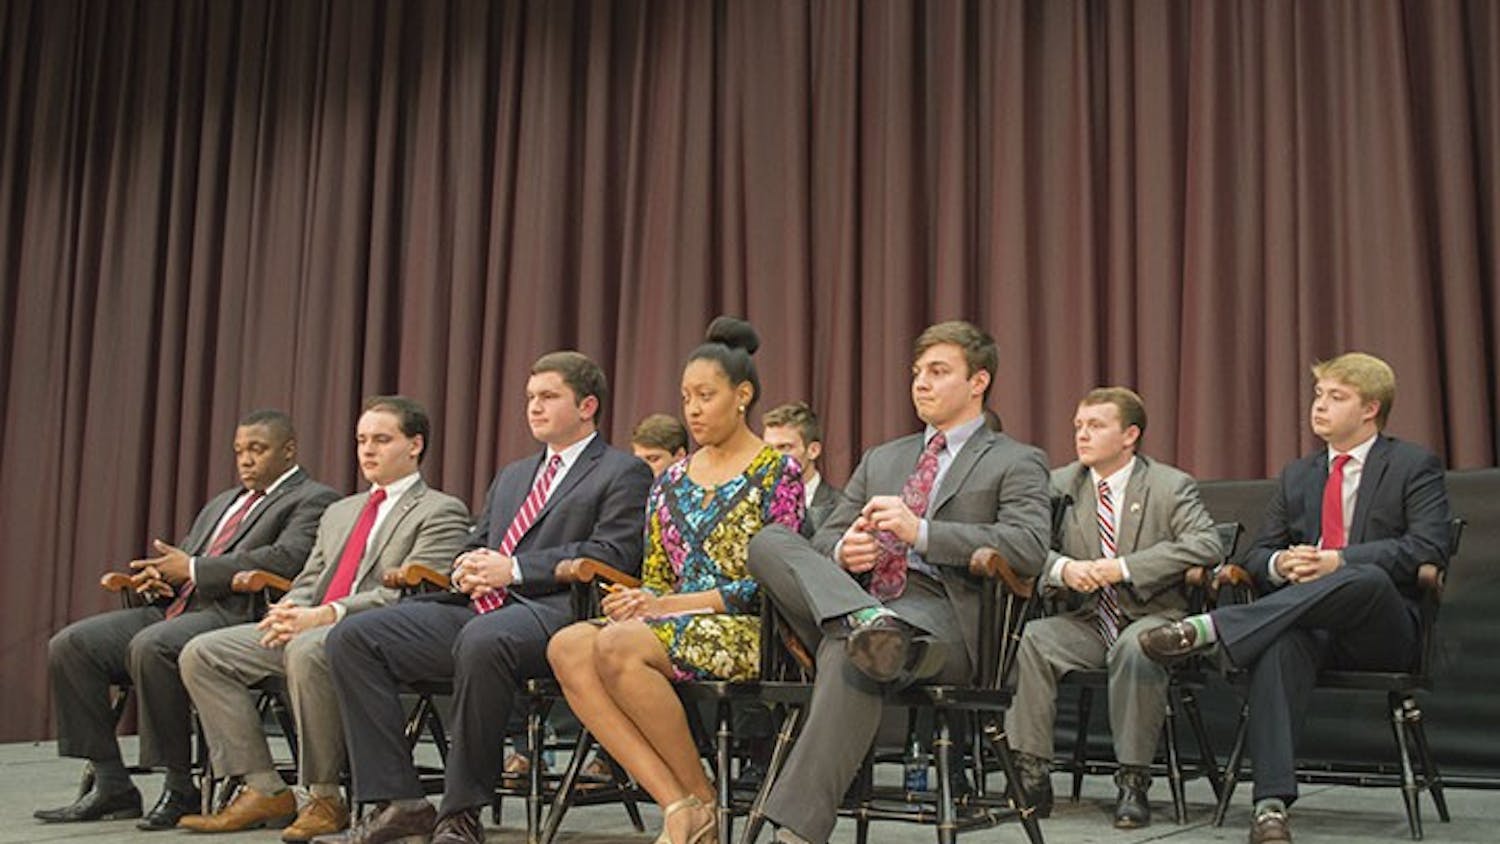 Student Government candidates addressed issues such as communication with the student body and how to unite students with the Columbia community.